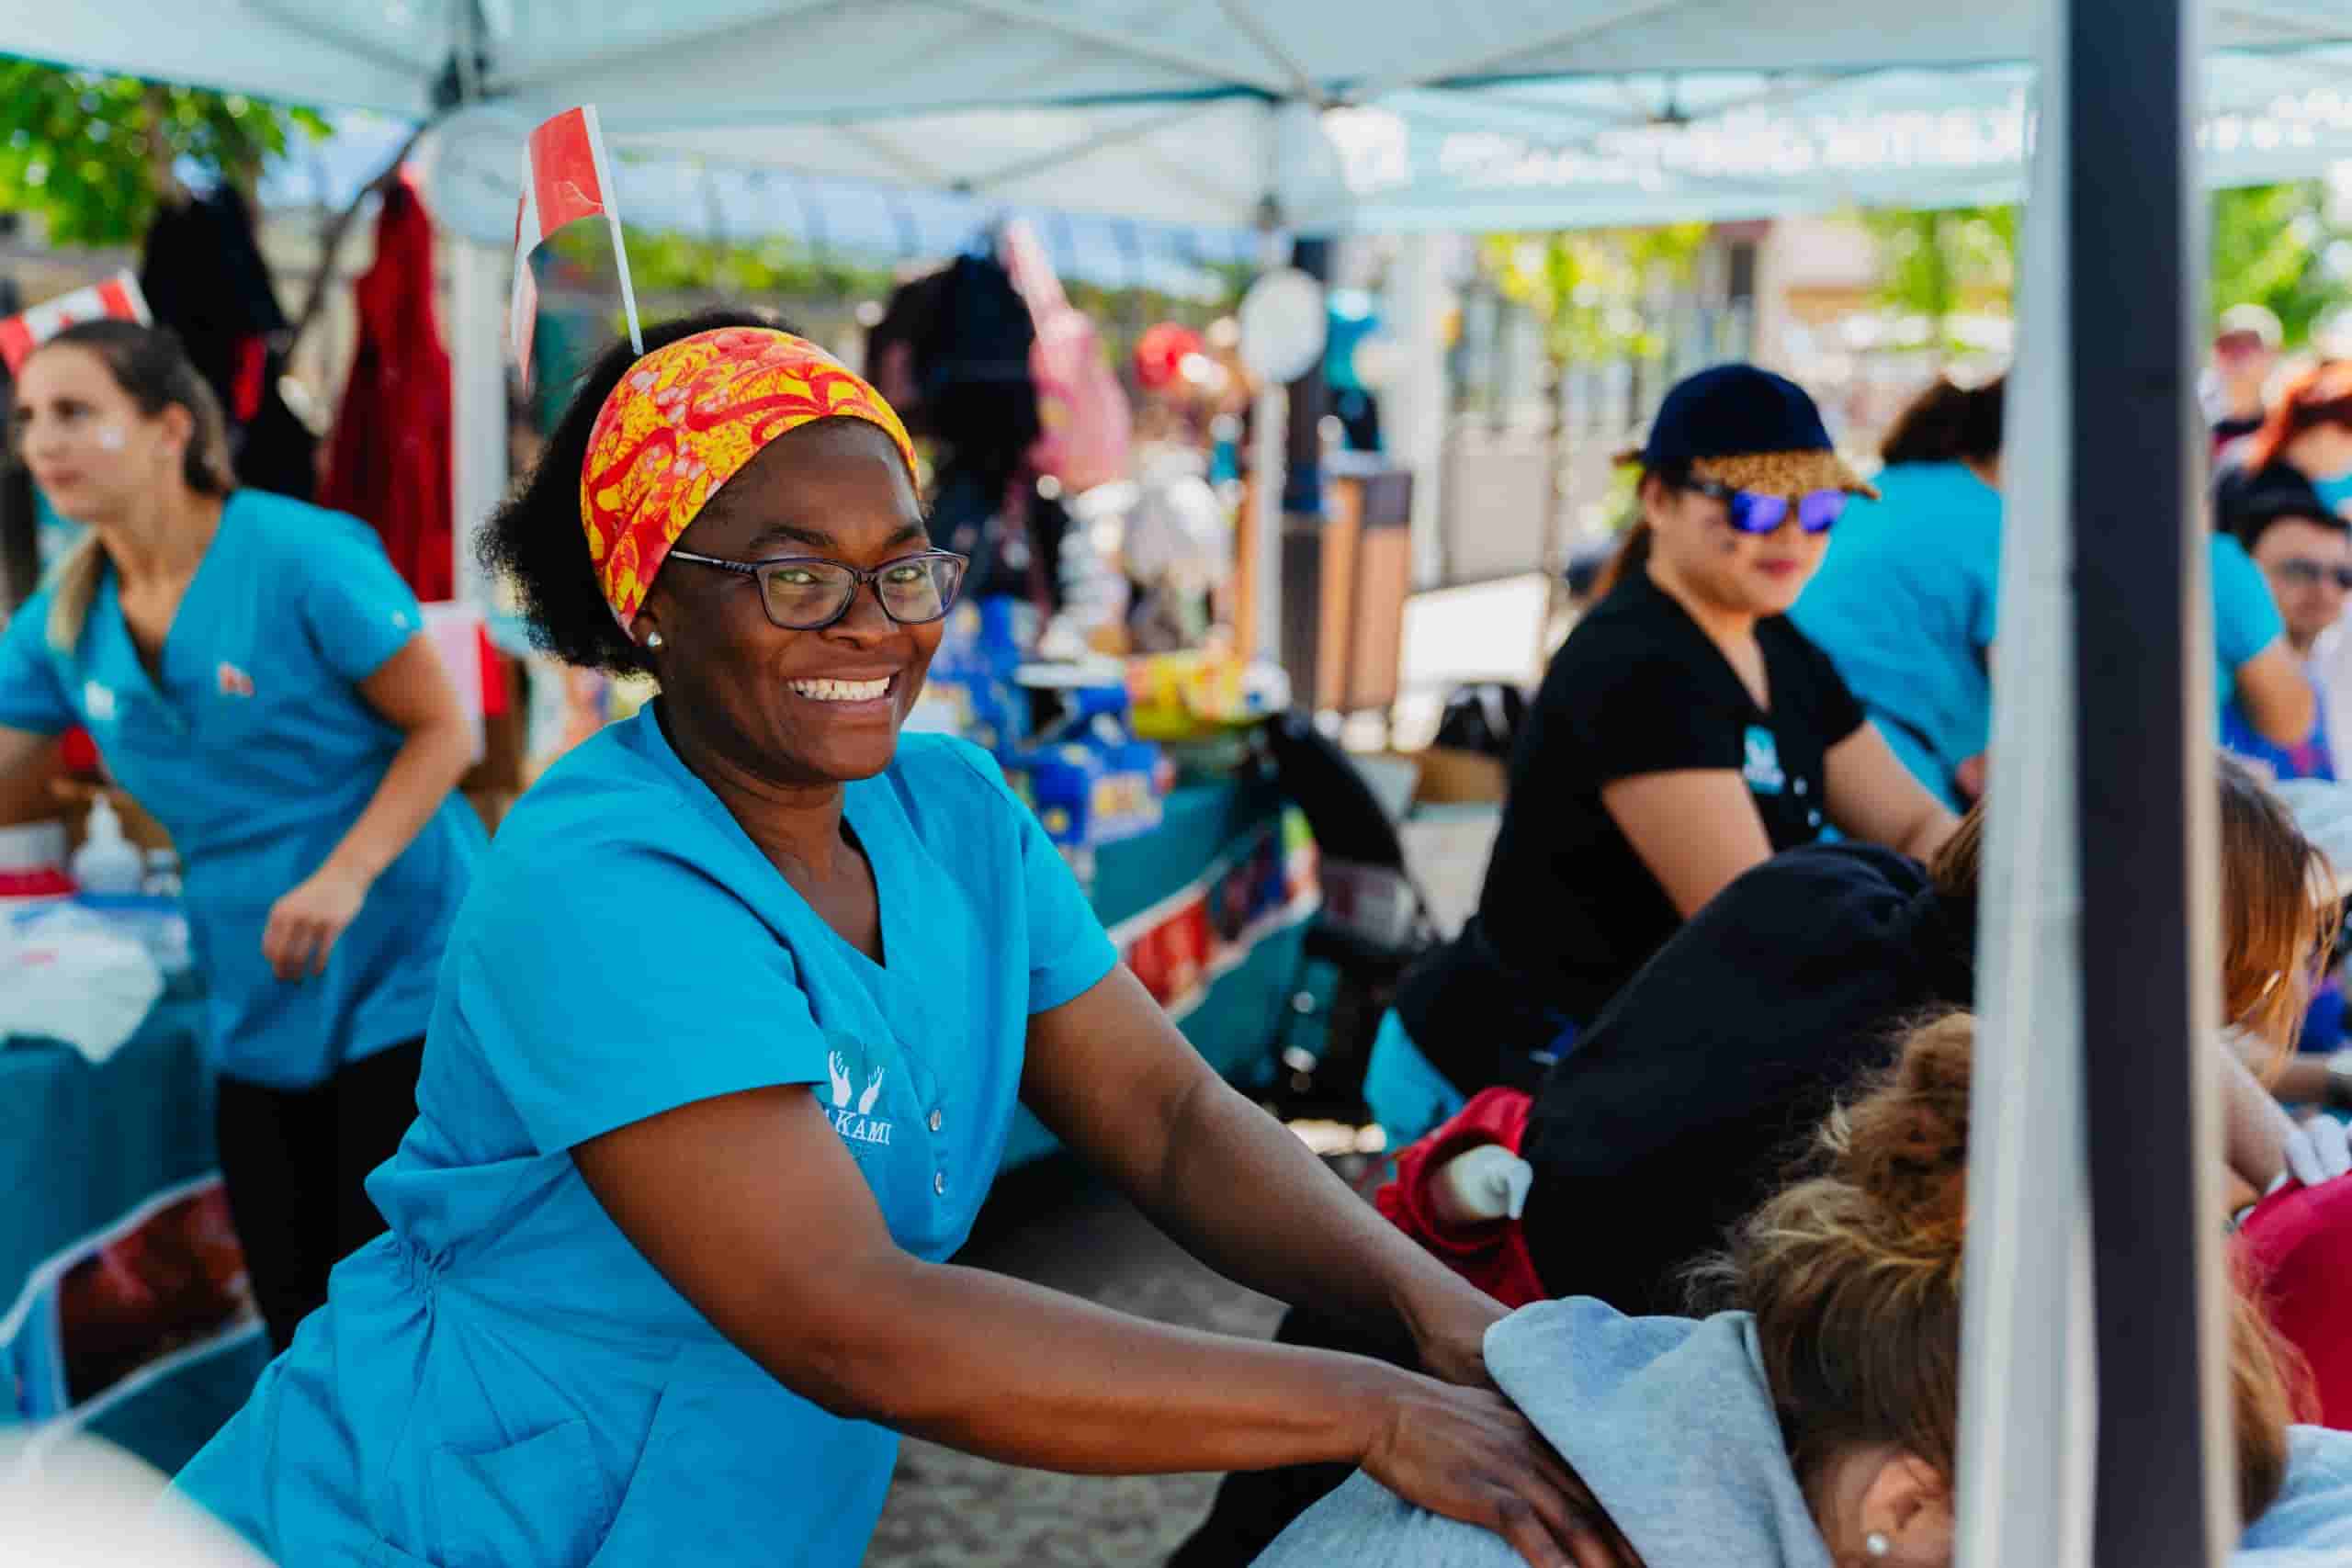 A middle aged black female student wearing a teal blue scrub top with the MaKami College logo on it massages someone in a seated chair while volunteering at an outreach event for the post-secondary college.